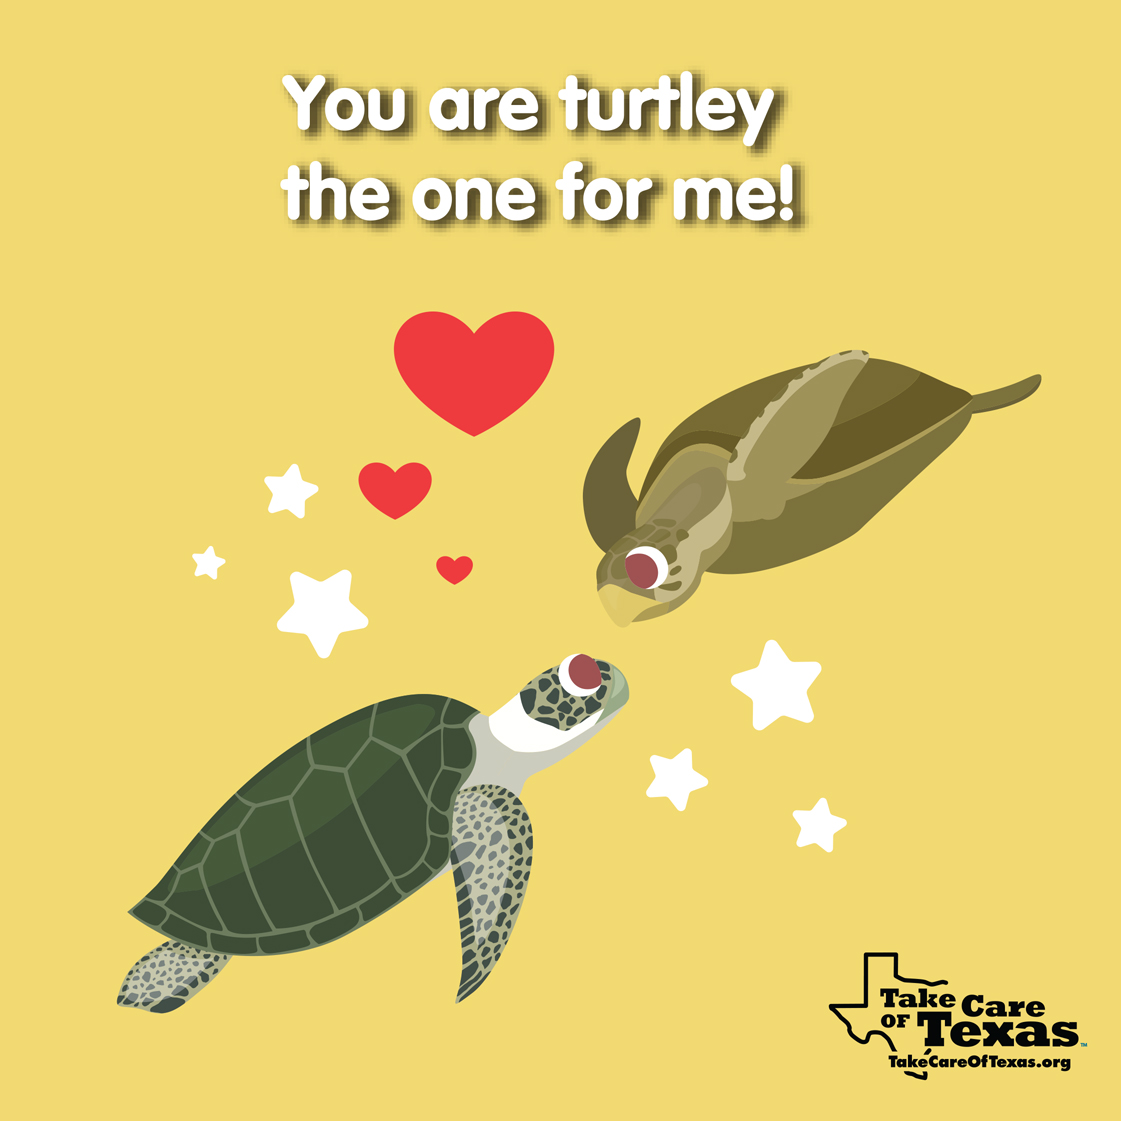 Turtles with the text "You are turtle-y the one for me!"